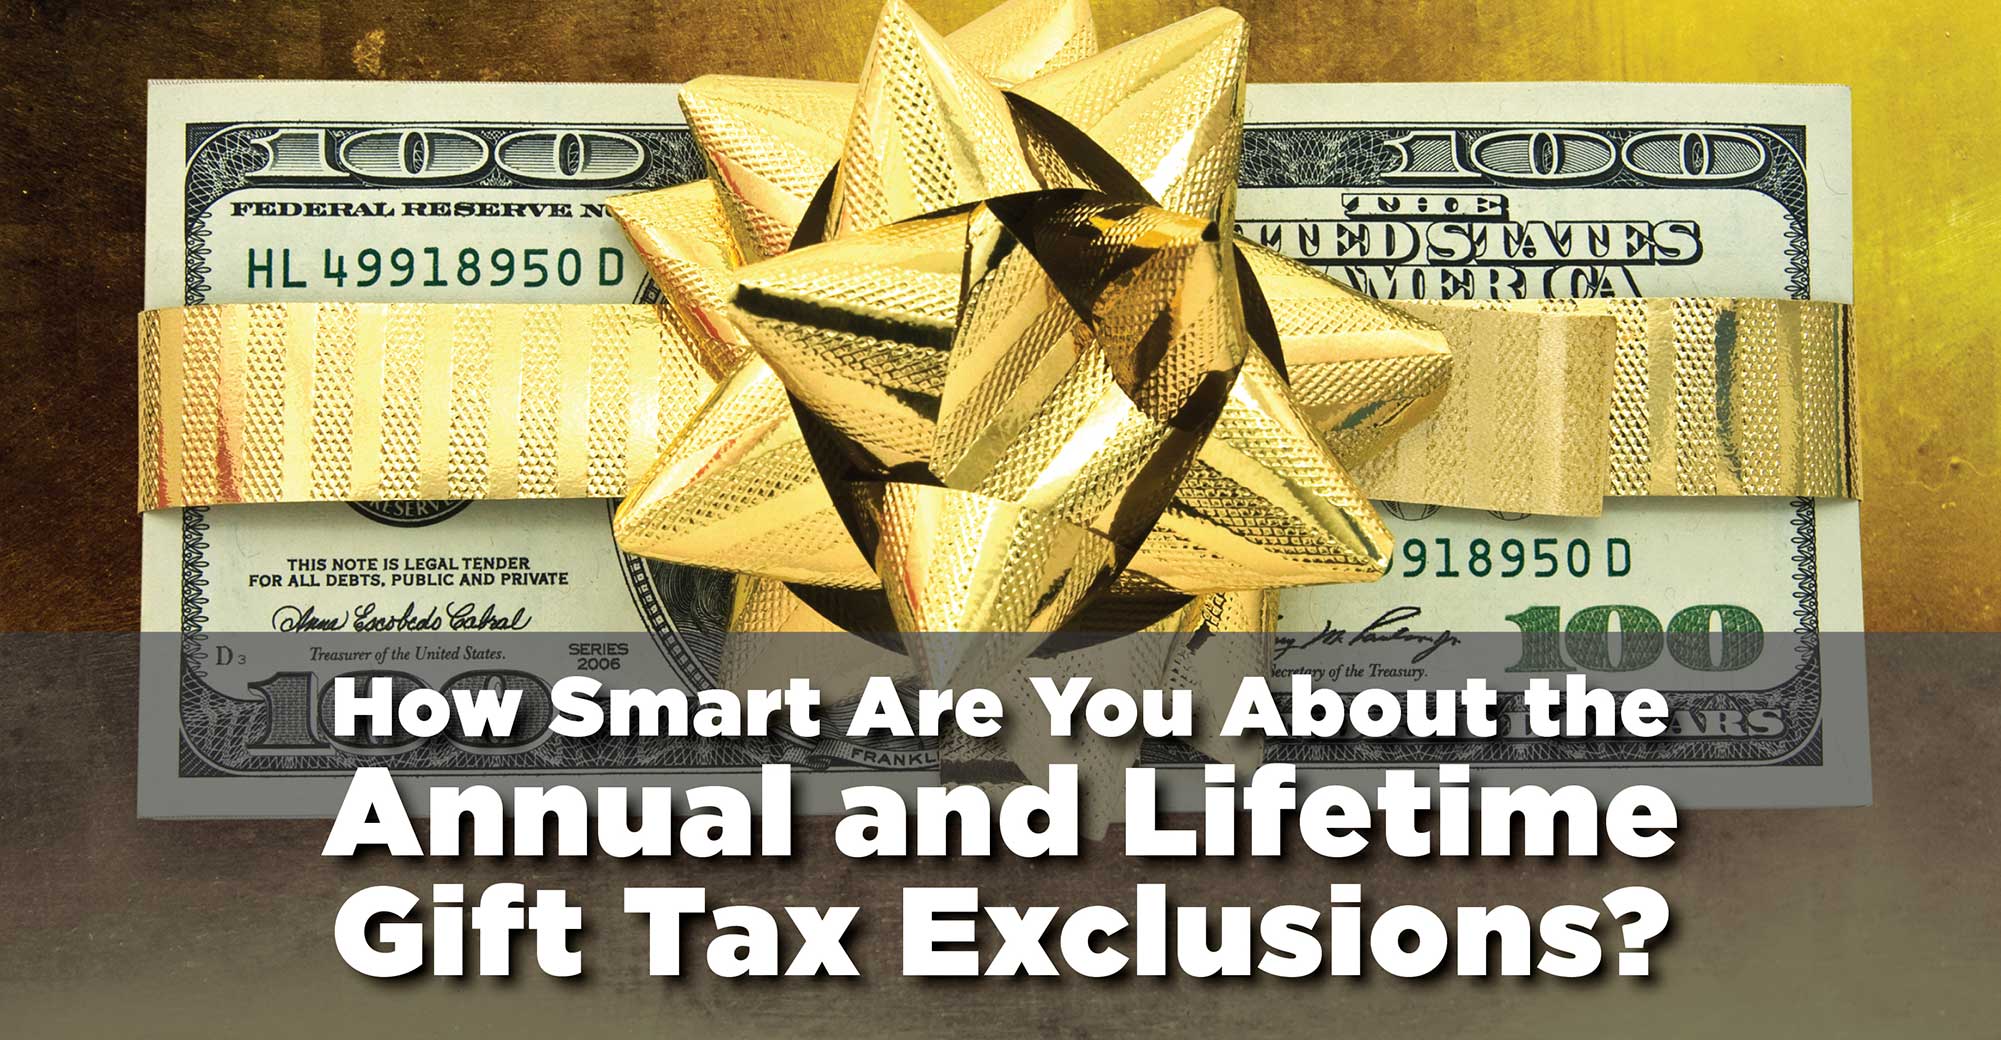 How Smart Are You About the Annual and Lifetime Gift Tax Exclusions